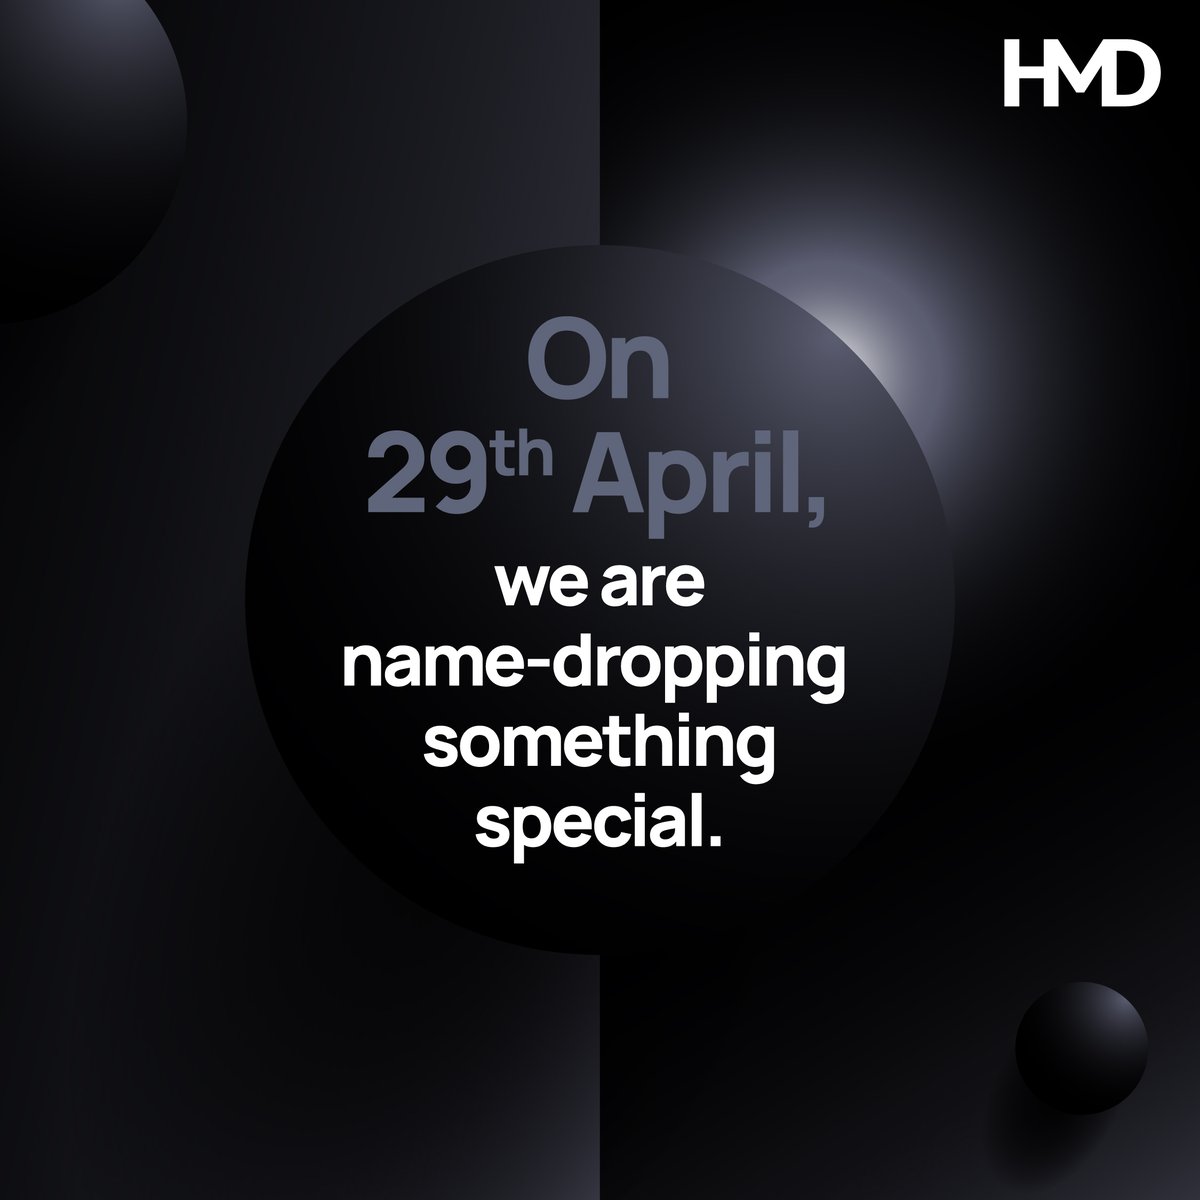 HMD's first smartphone in India is coming soon. It will announce the name on April 29th. It just launched HMD Vibe, Pulse and Pulse Pro smartphones. What do you think?